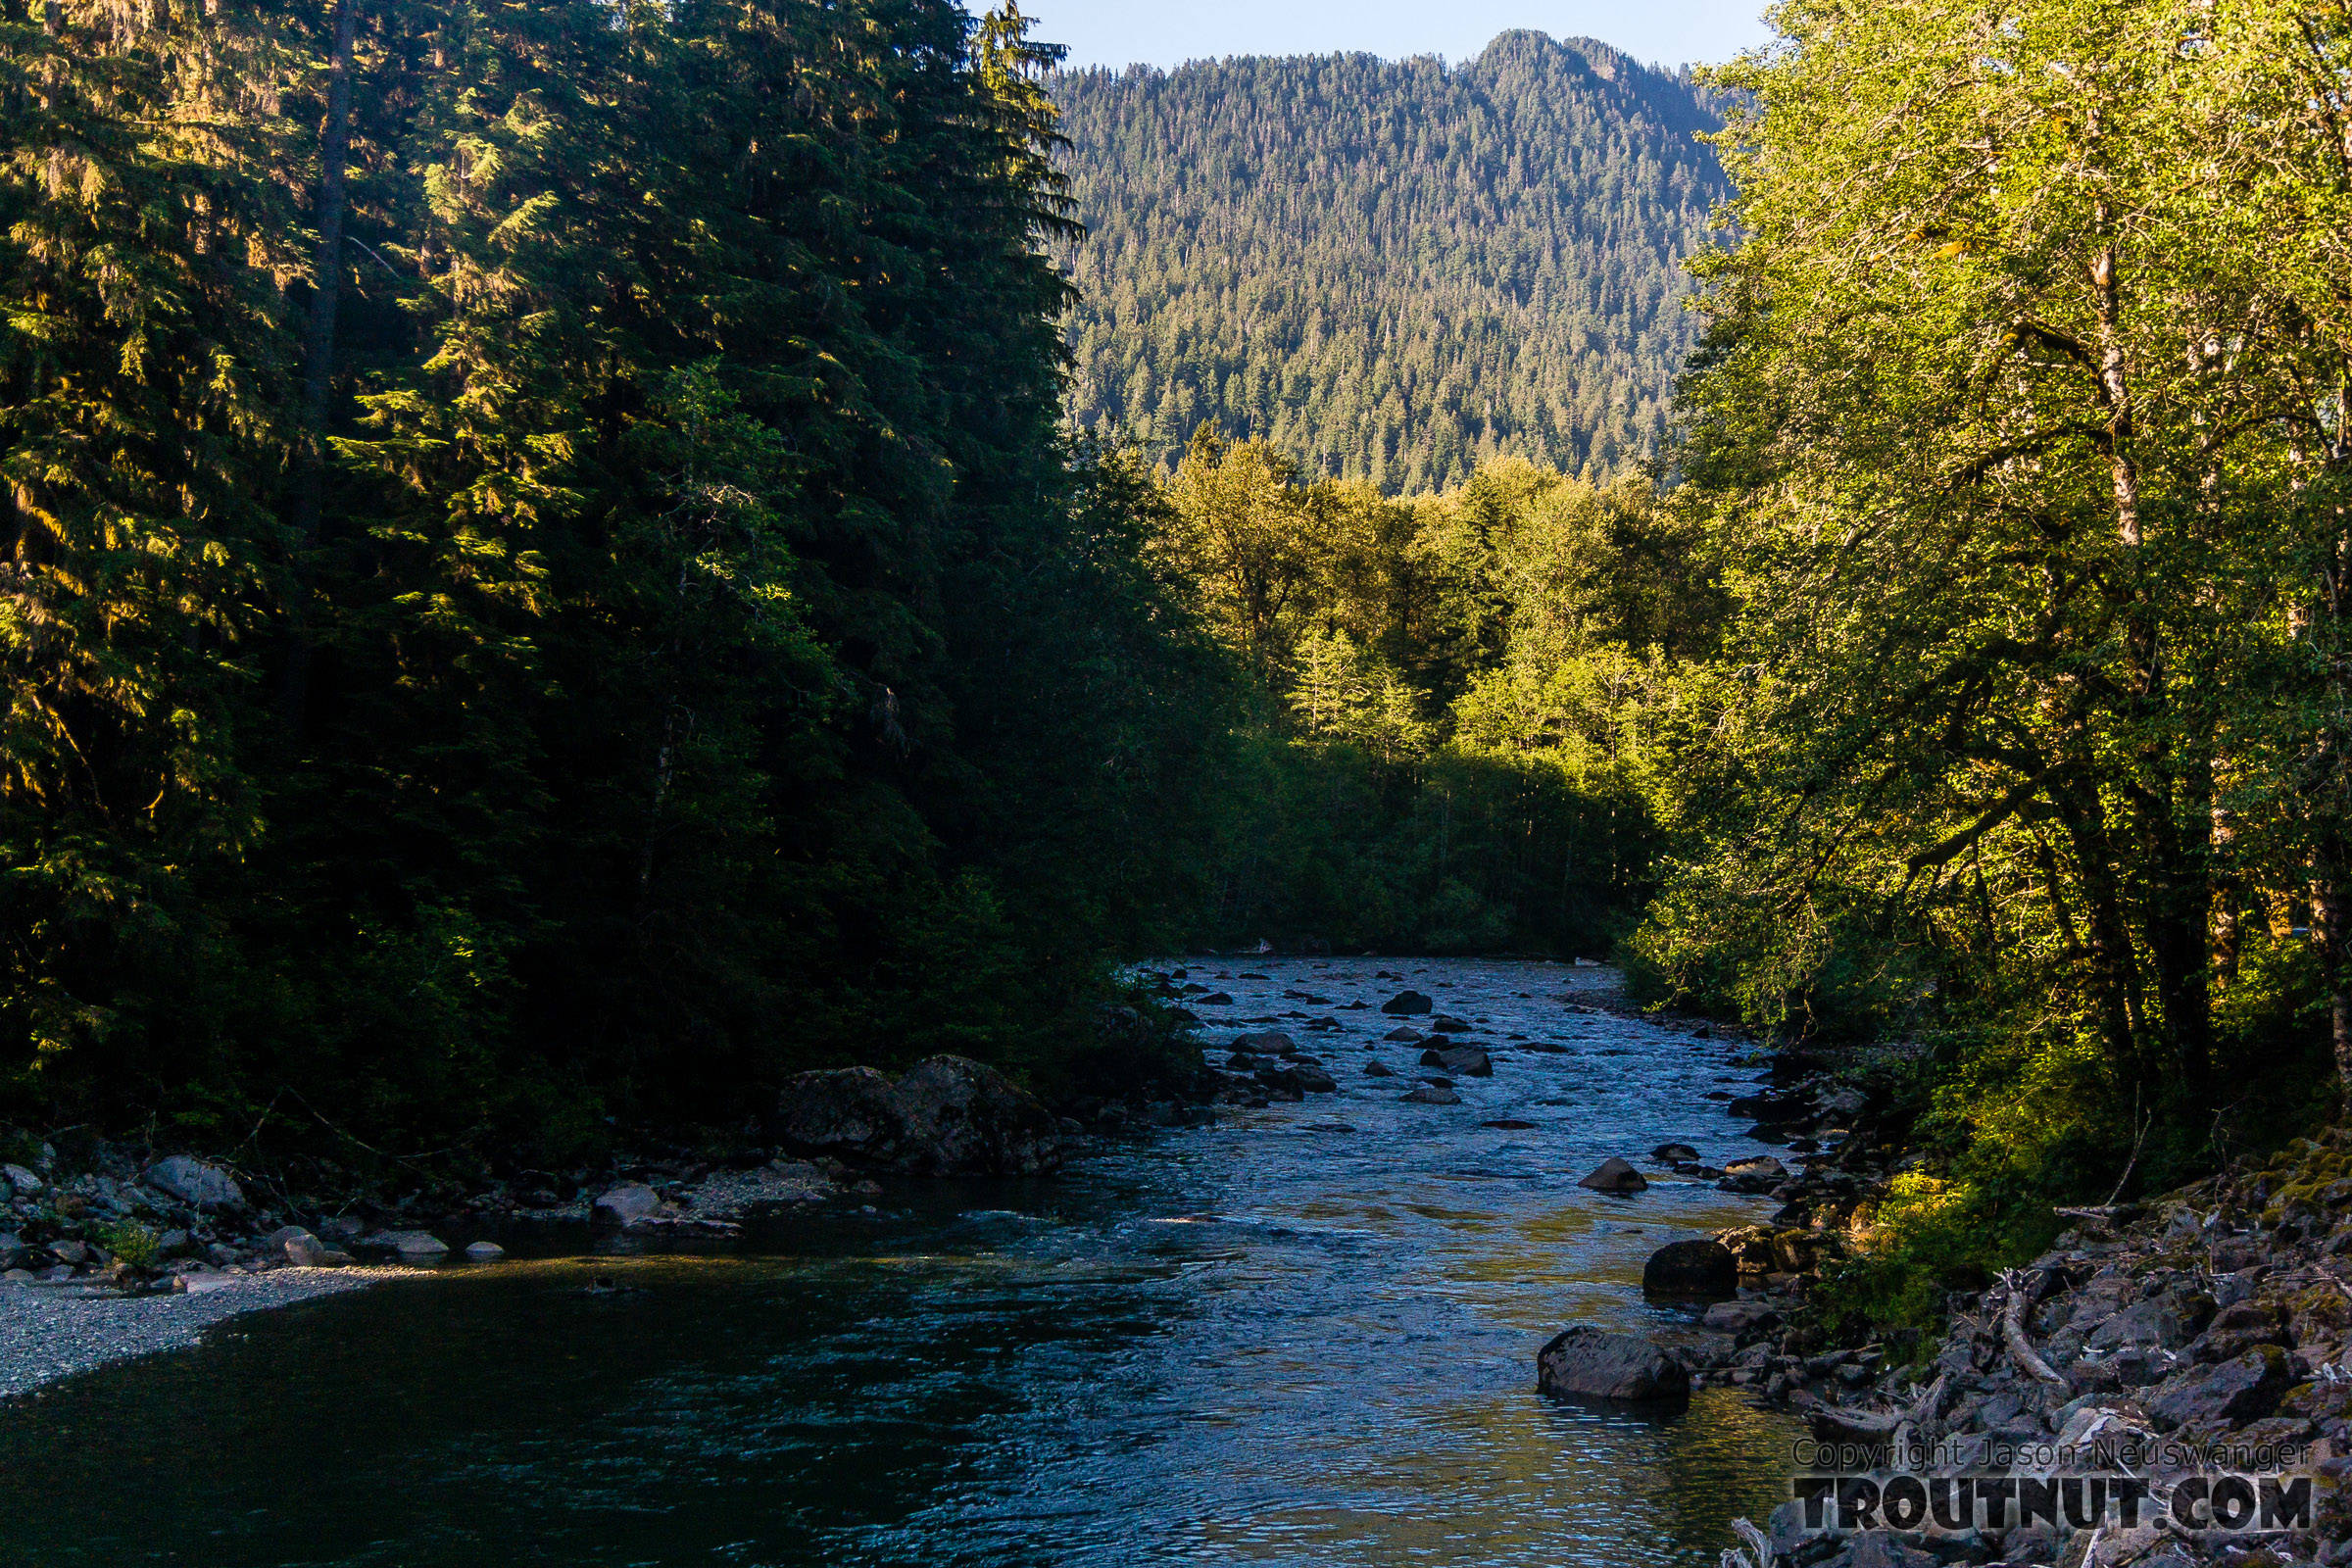  From the South Fork Stillaguamish River in Washington.